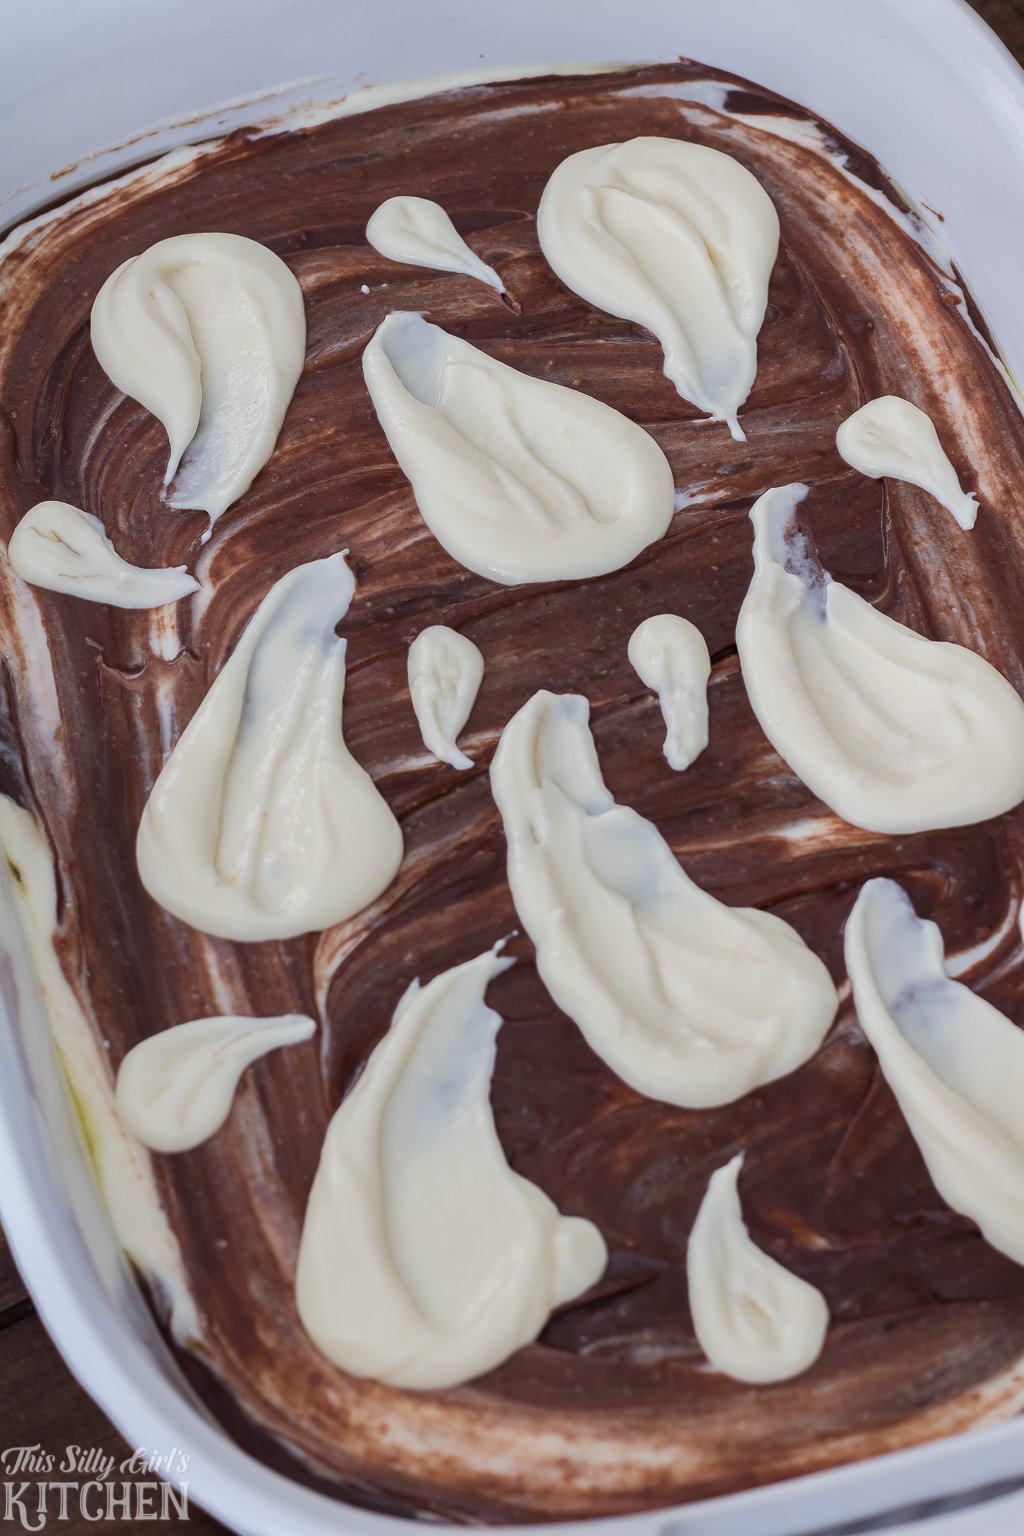 Cheesecake filling swirled into ghost shapes over brownie batter.